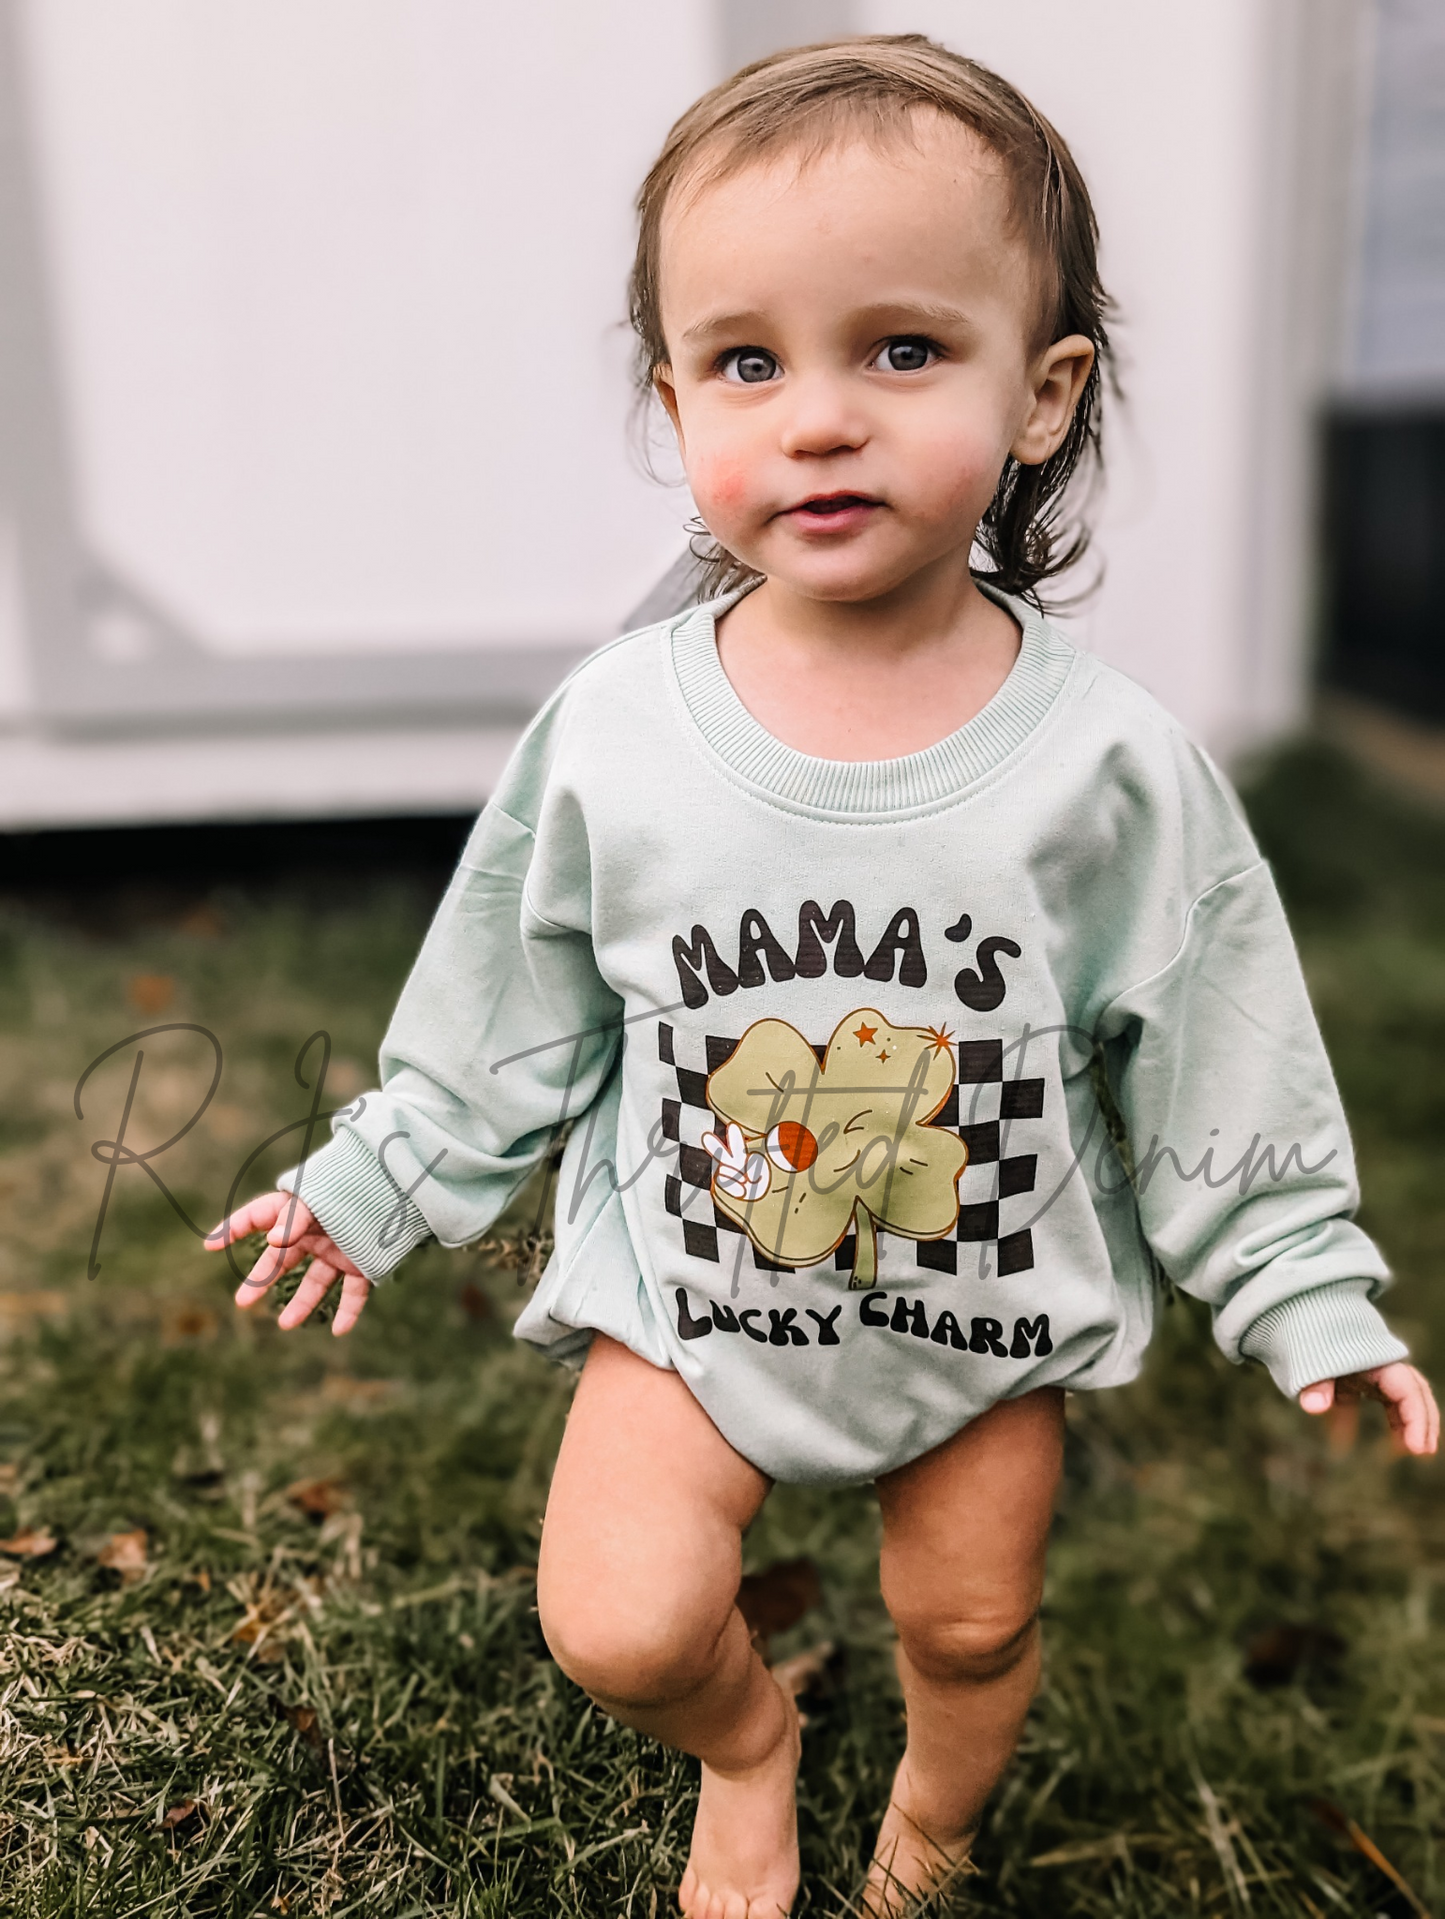 Mama's Lucky Charm Romper